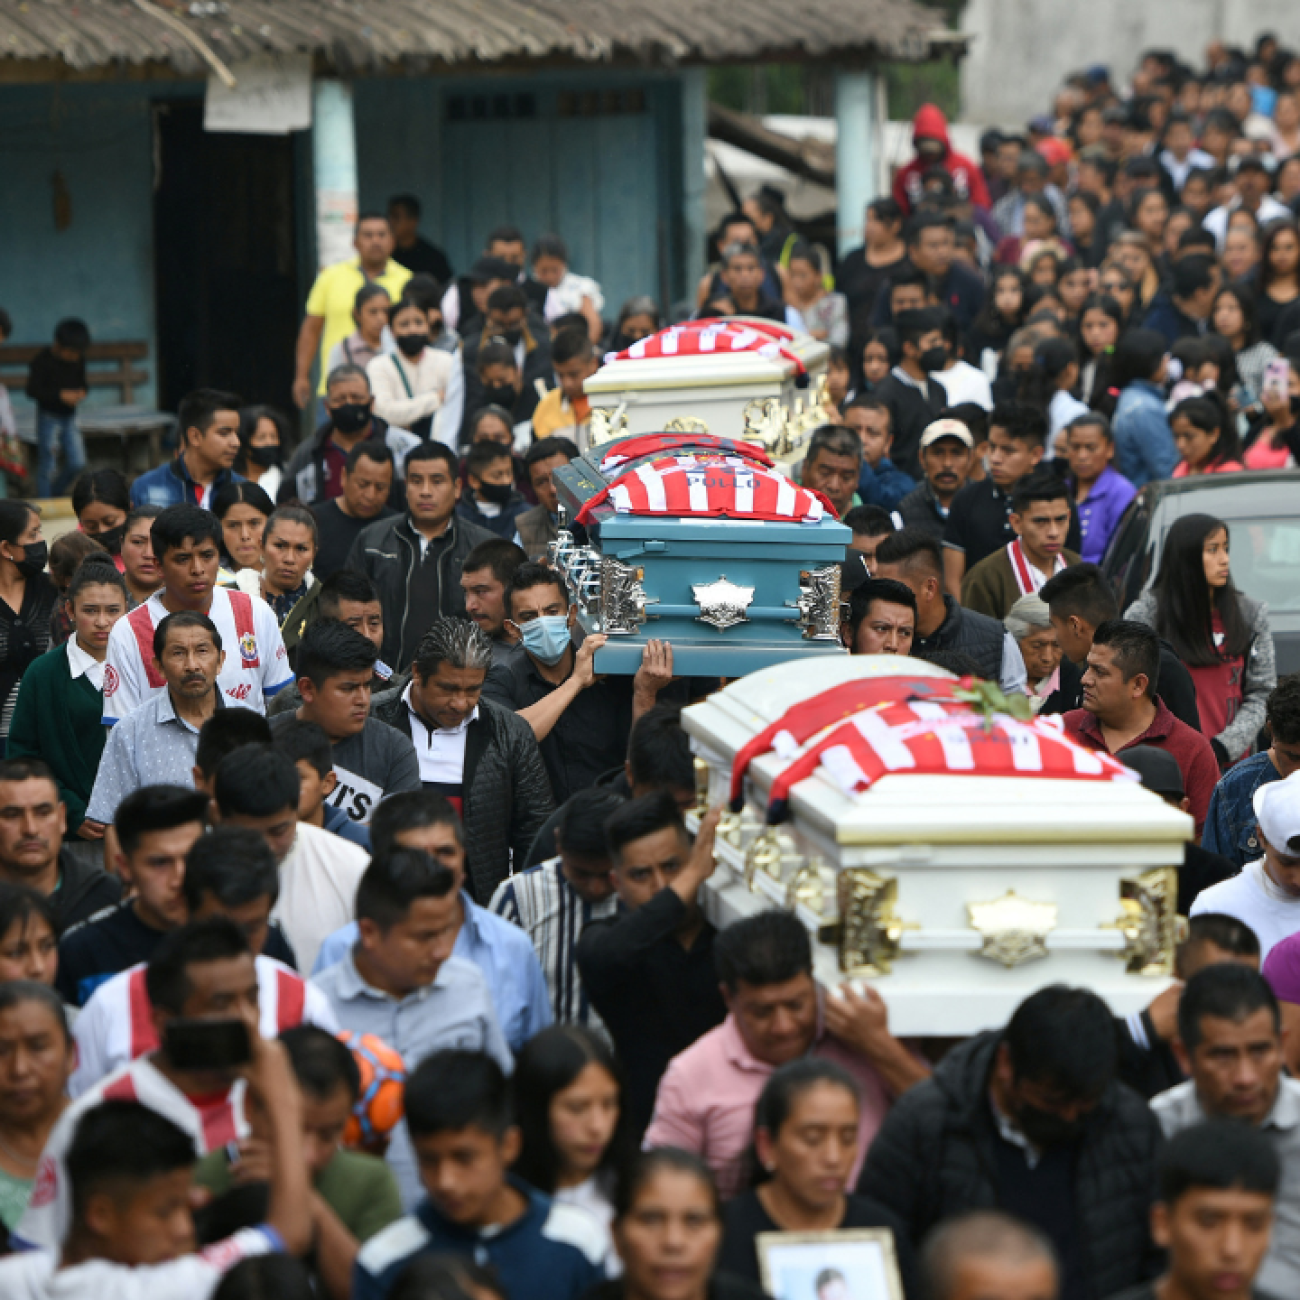 Relatives and friends carry the caskets of Jair Valencia, 19, Yovani Valencia, 16, and Misael Olivares, 16, at their funeral in San Marcos Atexquilapan, in Veracruz, Mexico, on July 15, 2022. They died in a human trafficker’s truck, in Texas, in June 2022.